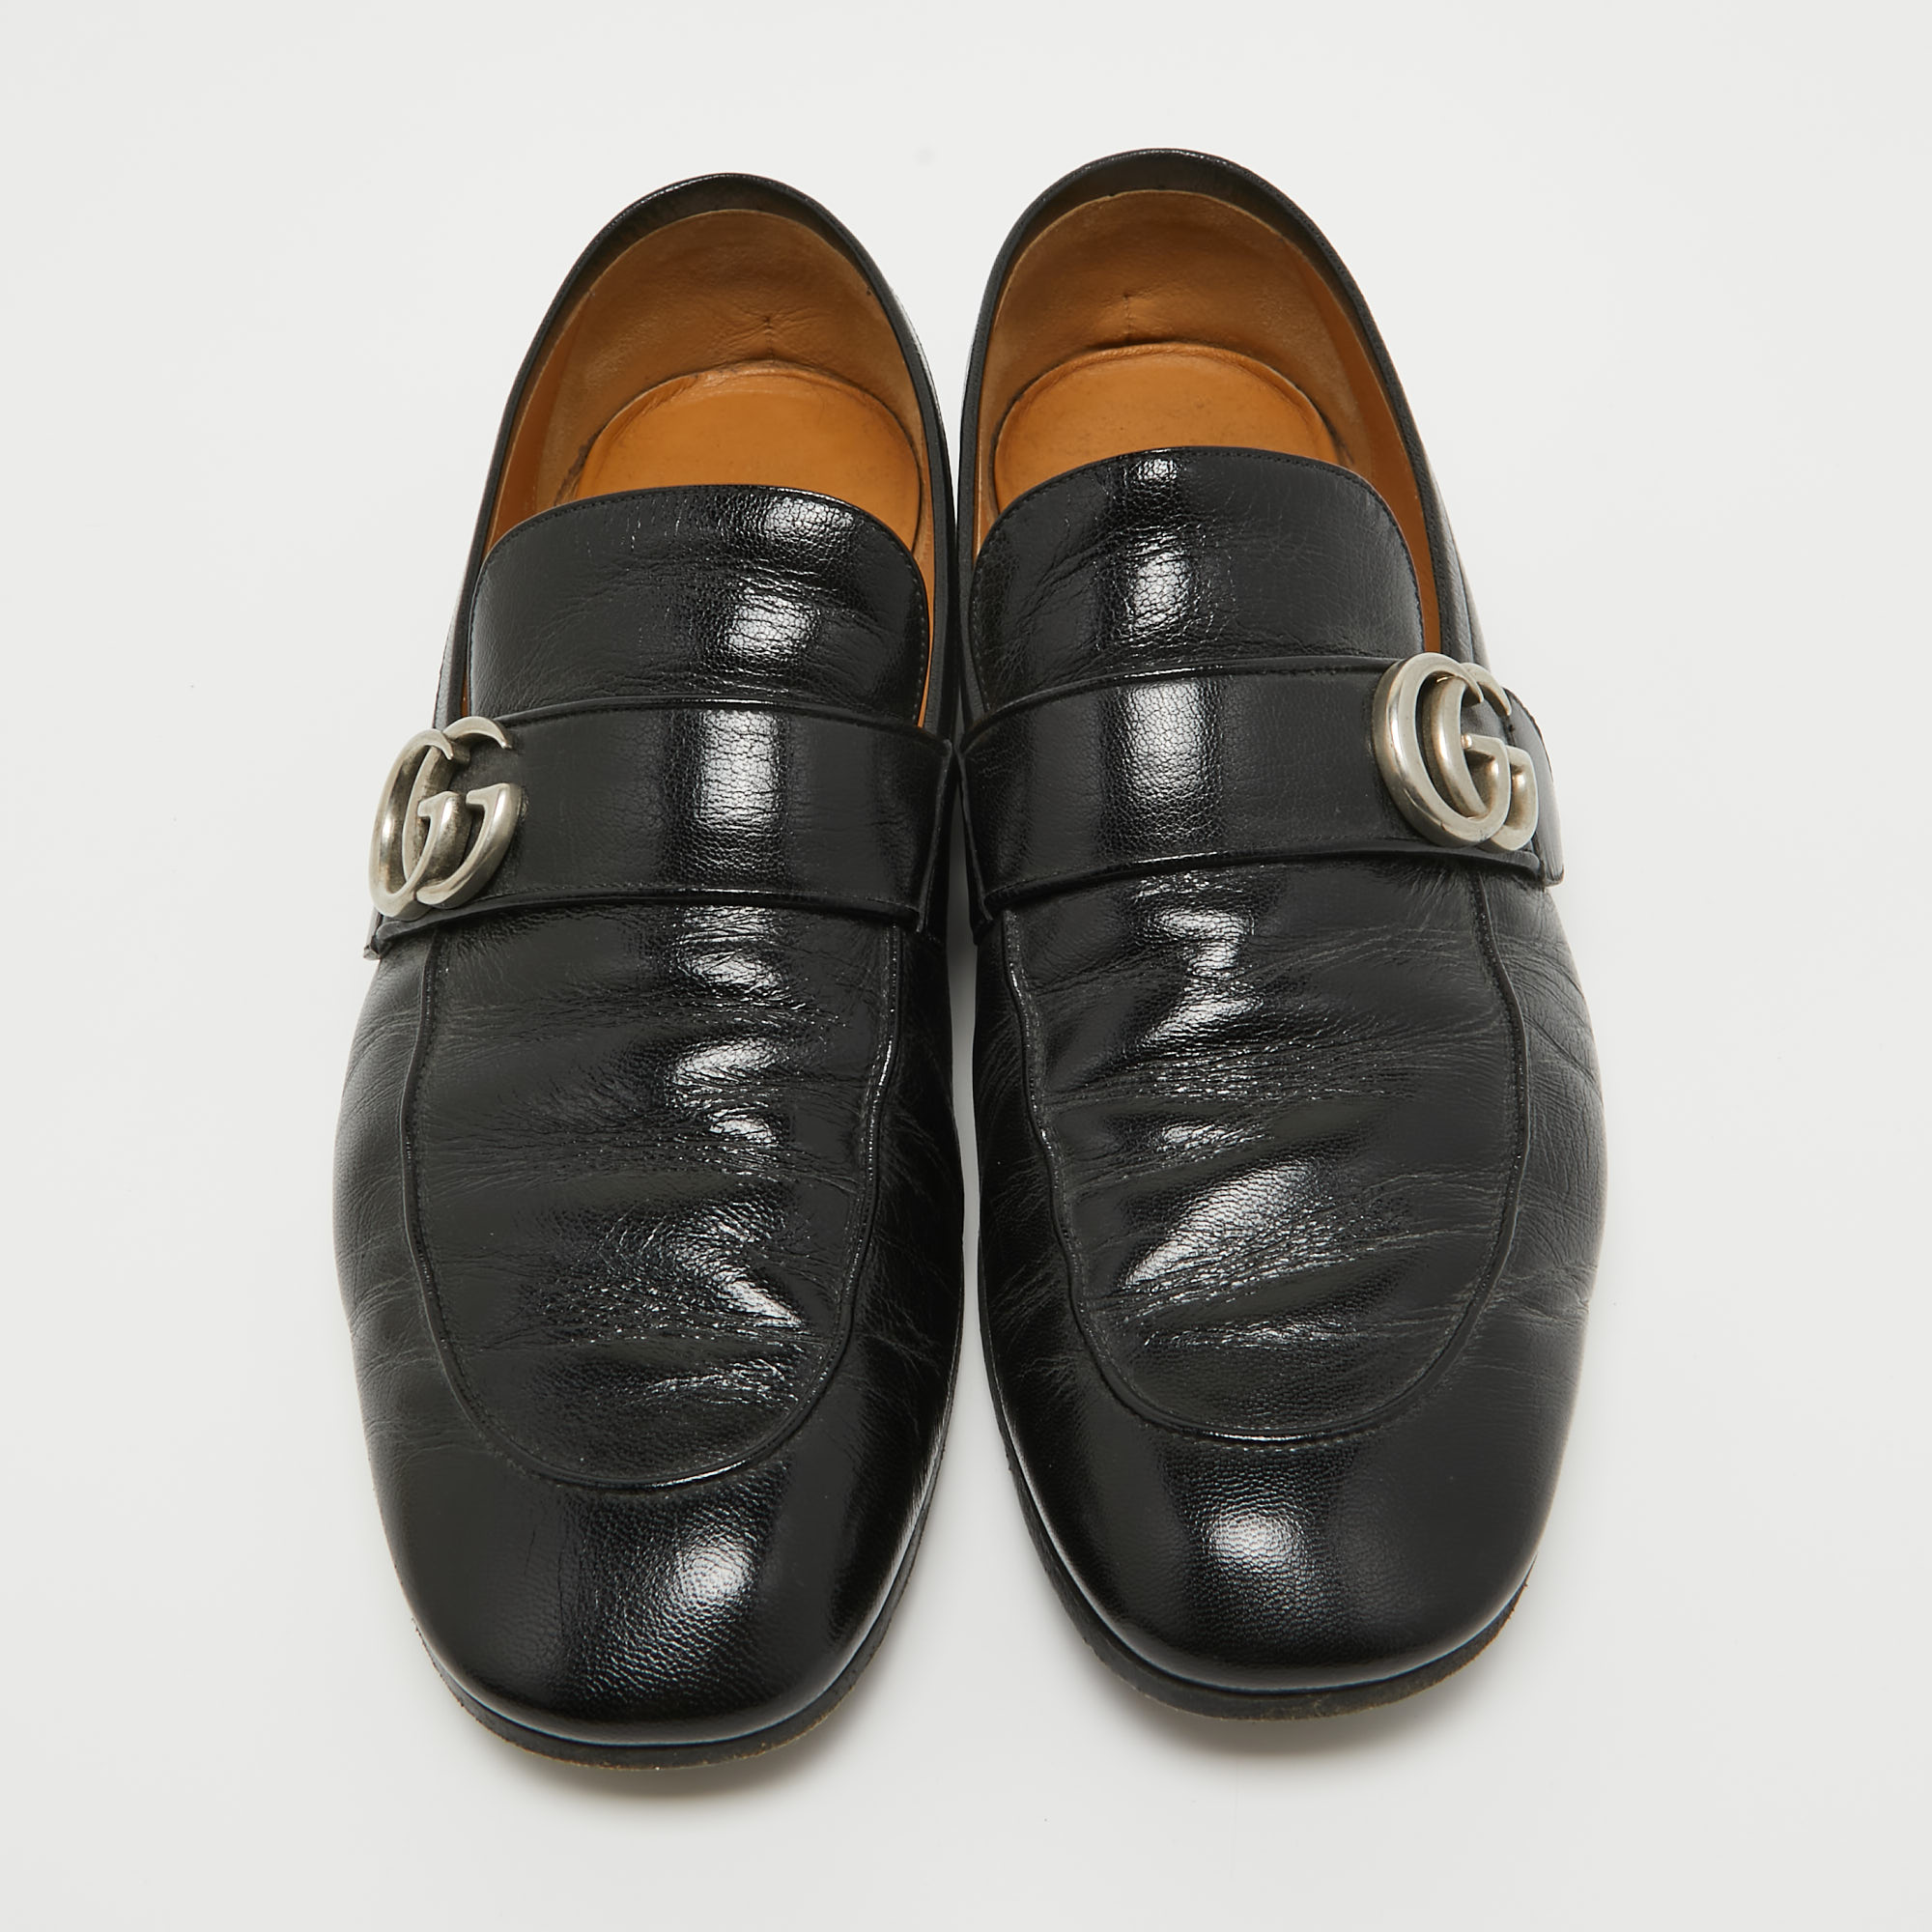 Gucci Black Leather GG Marmont Slip On Loafers Size 43